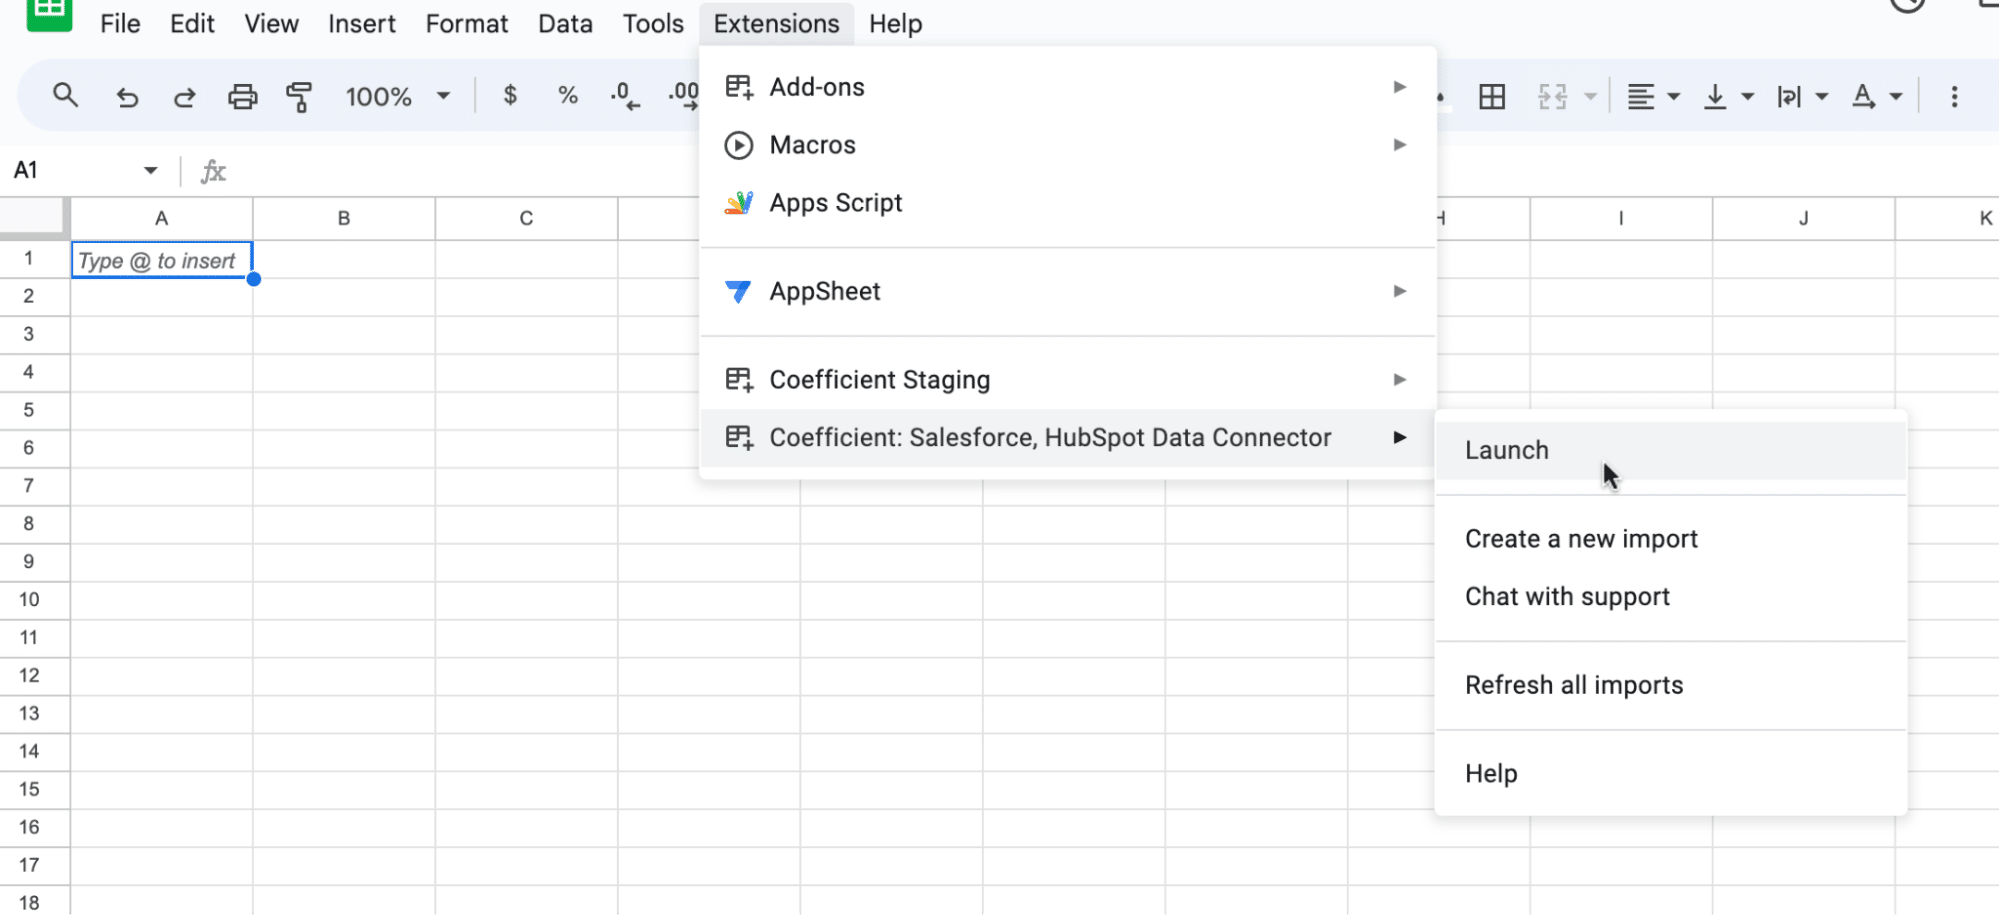  Launching Coefficient from the Extensions menu in Google Sheets